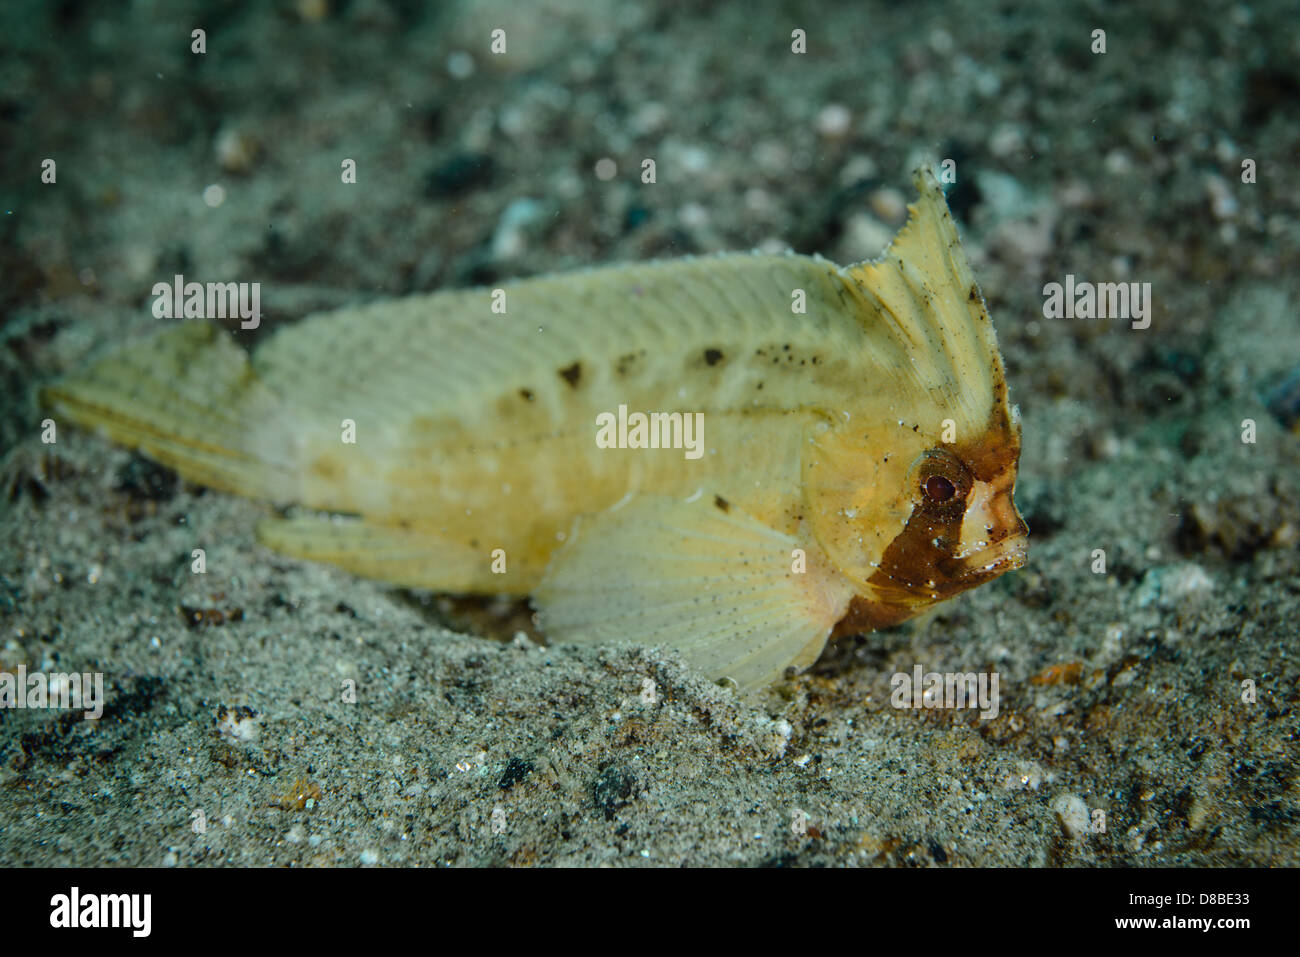 A cream color spiny or cockatoo waspfish Ablabys macracanthus, from the family of scorpionfish Stock Photo